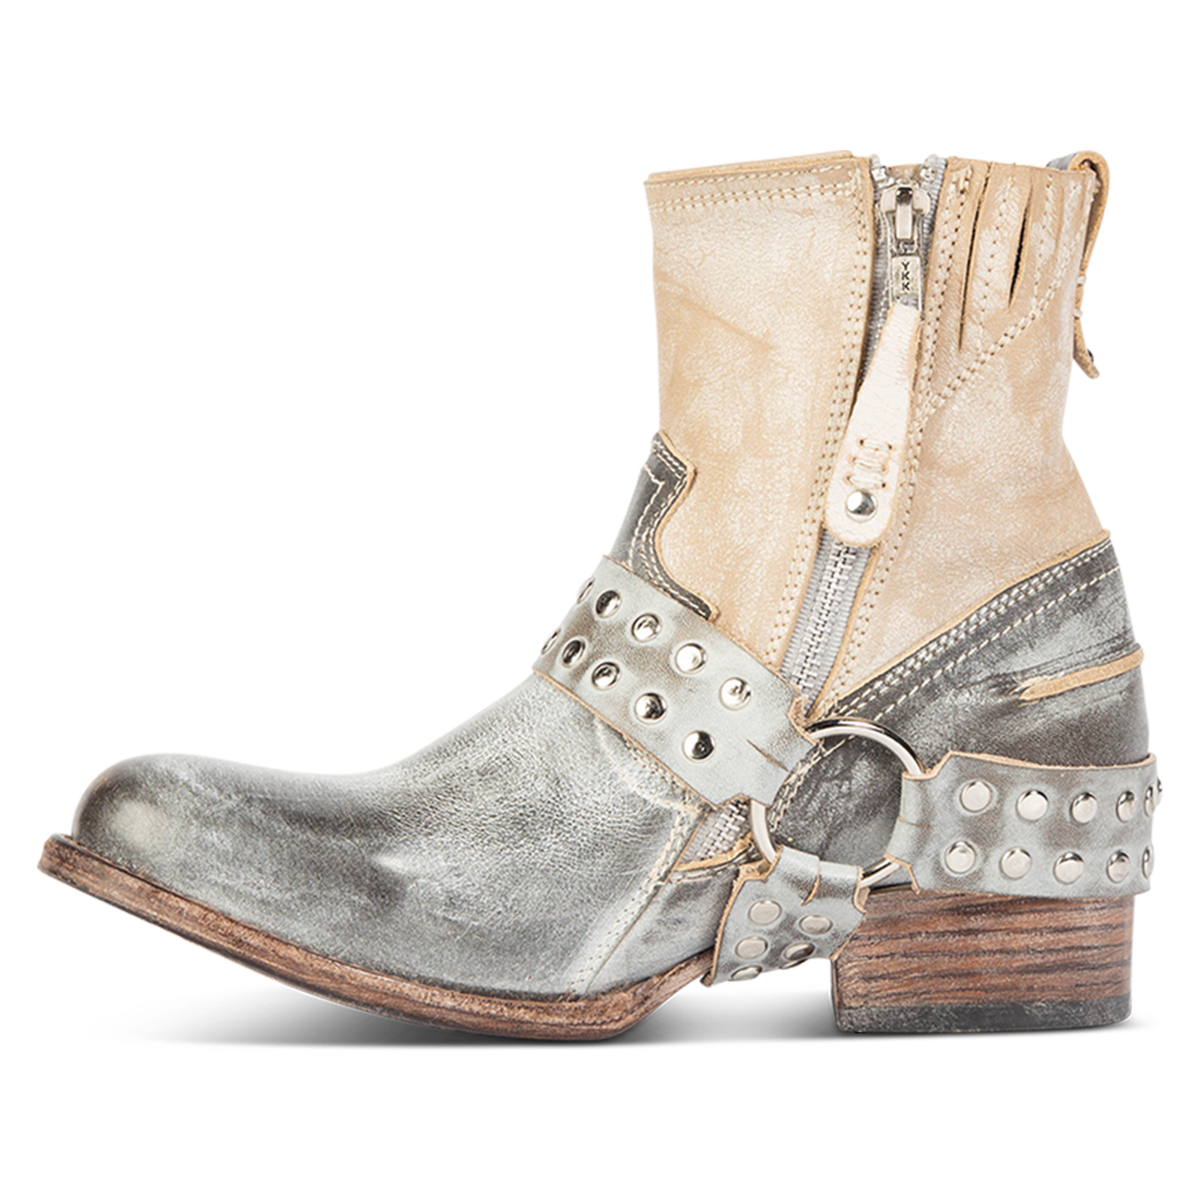 Inside view showing working zip closure and embellished harness on FREEBIRD women's Ramone ice multi leather bootie